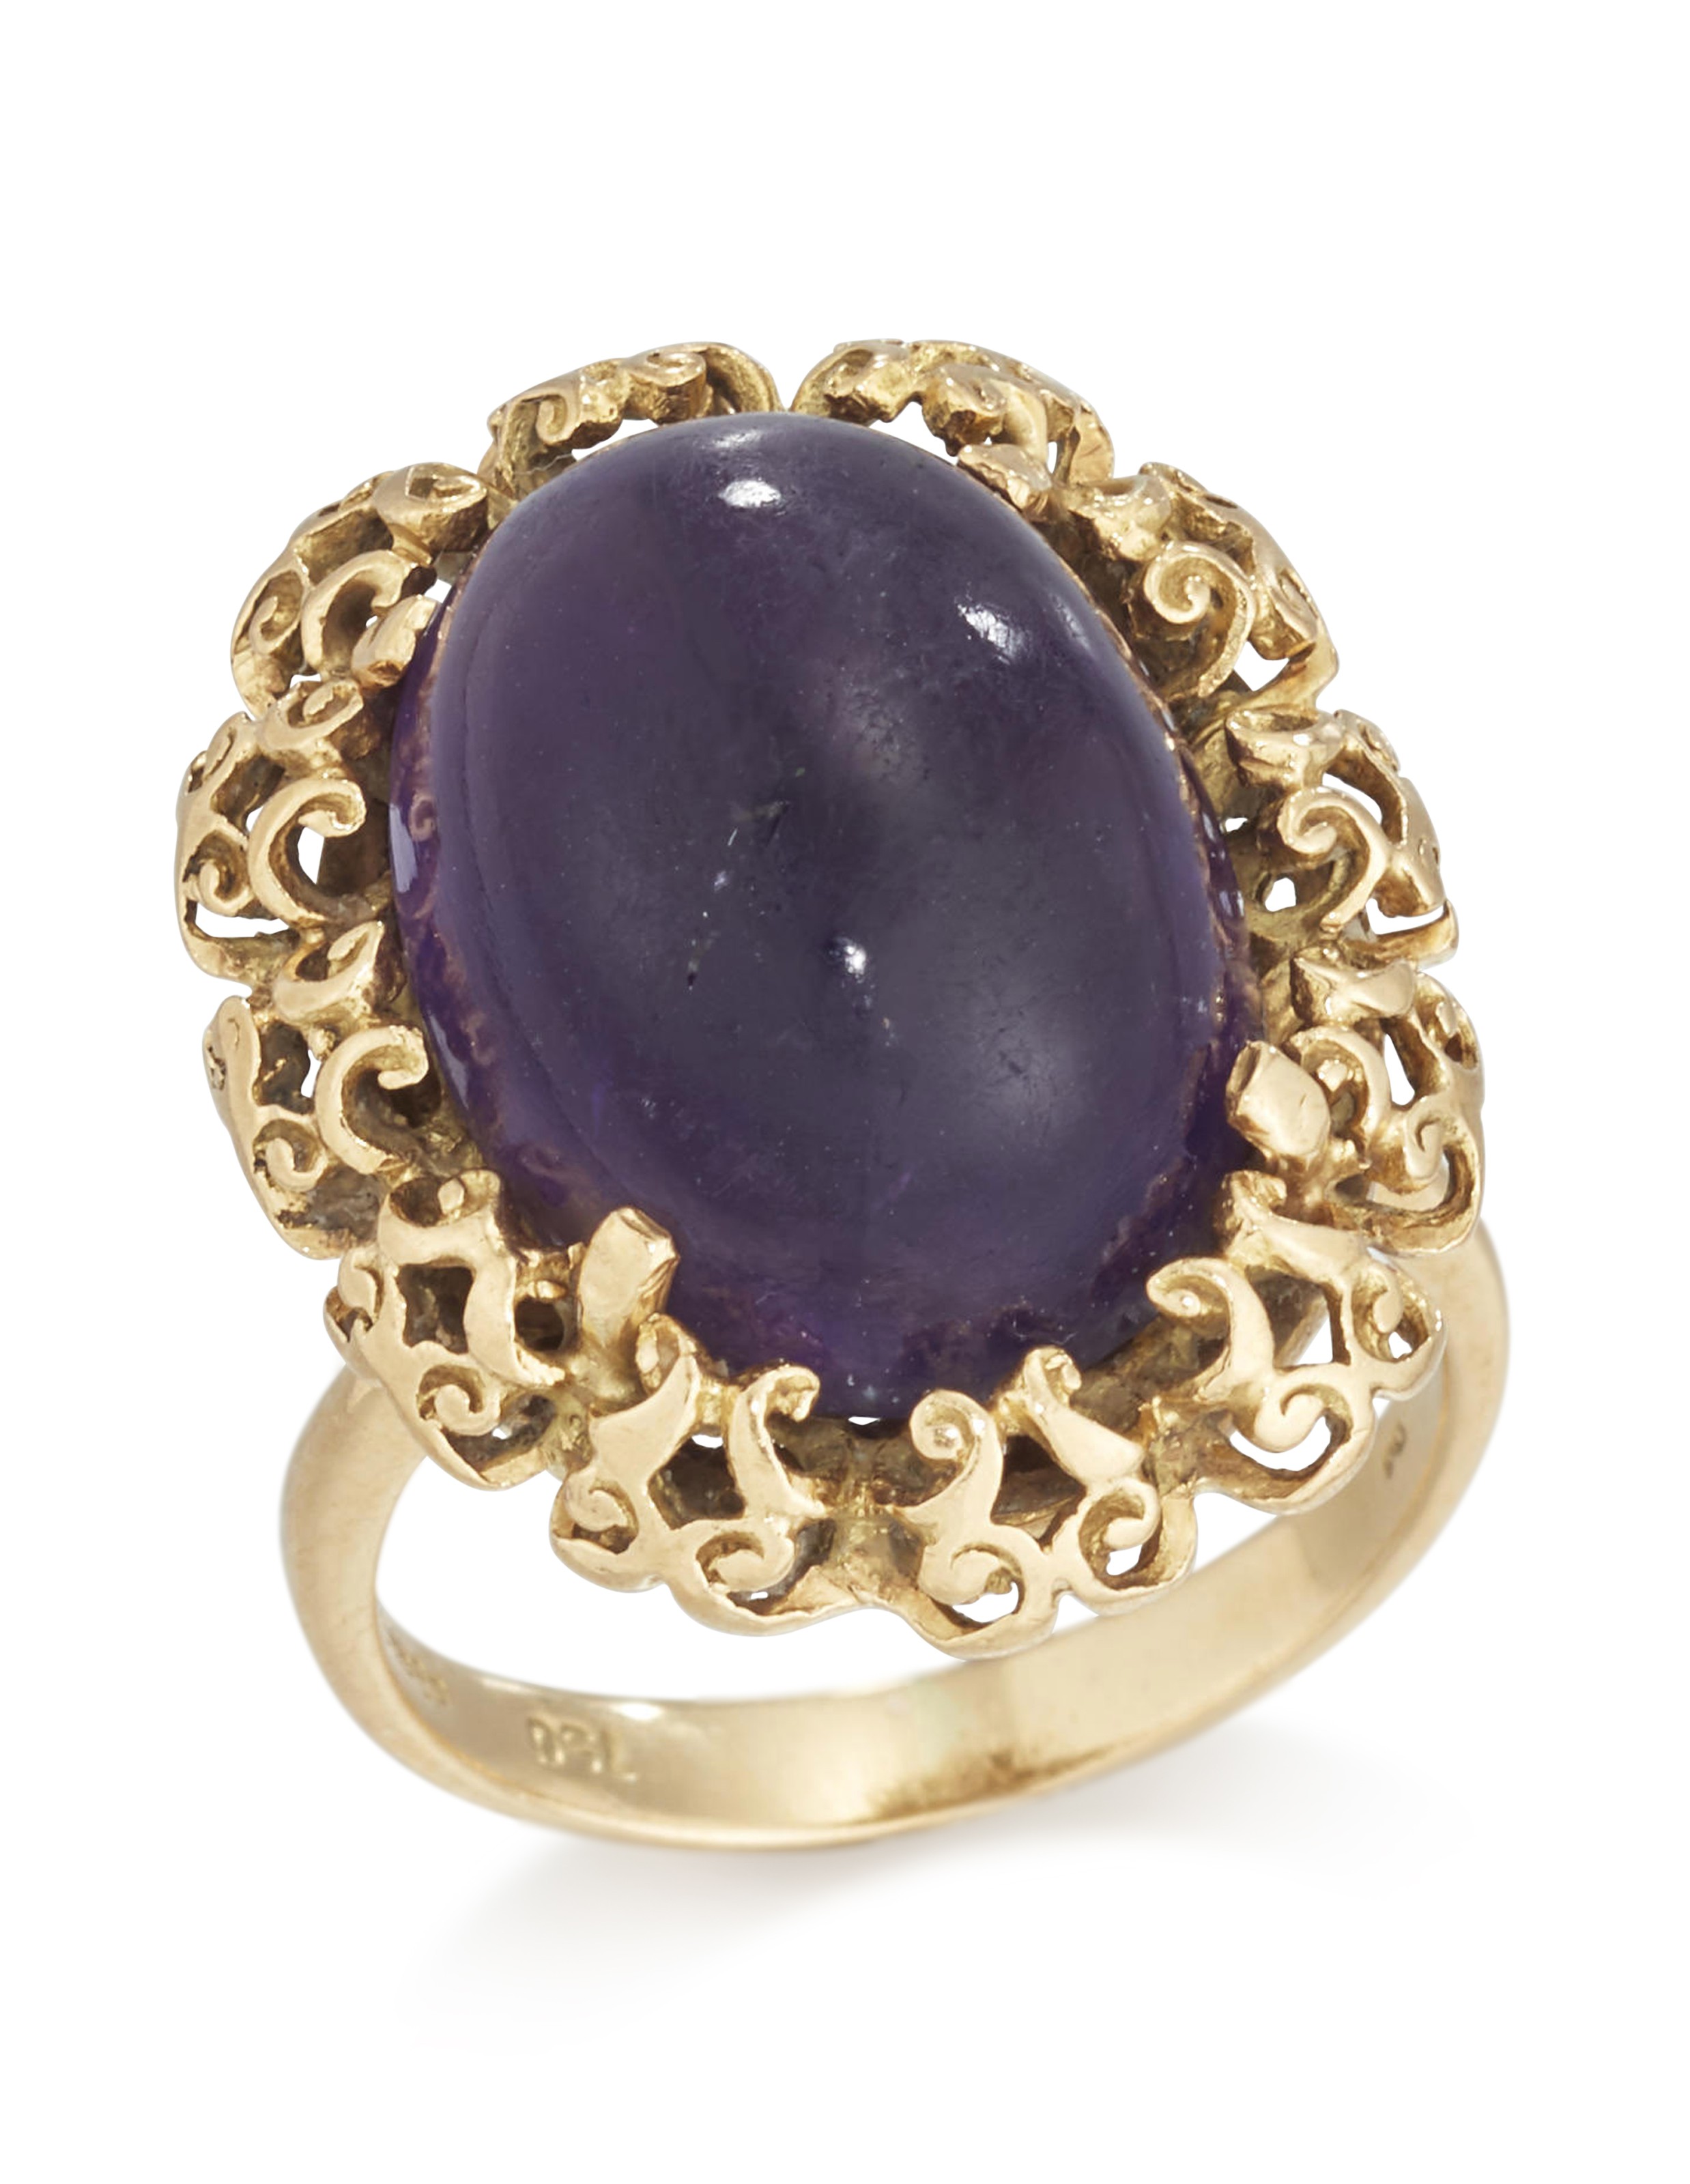 Margaret Thatcher's 18-carat gold and amethyst ring 